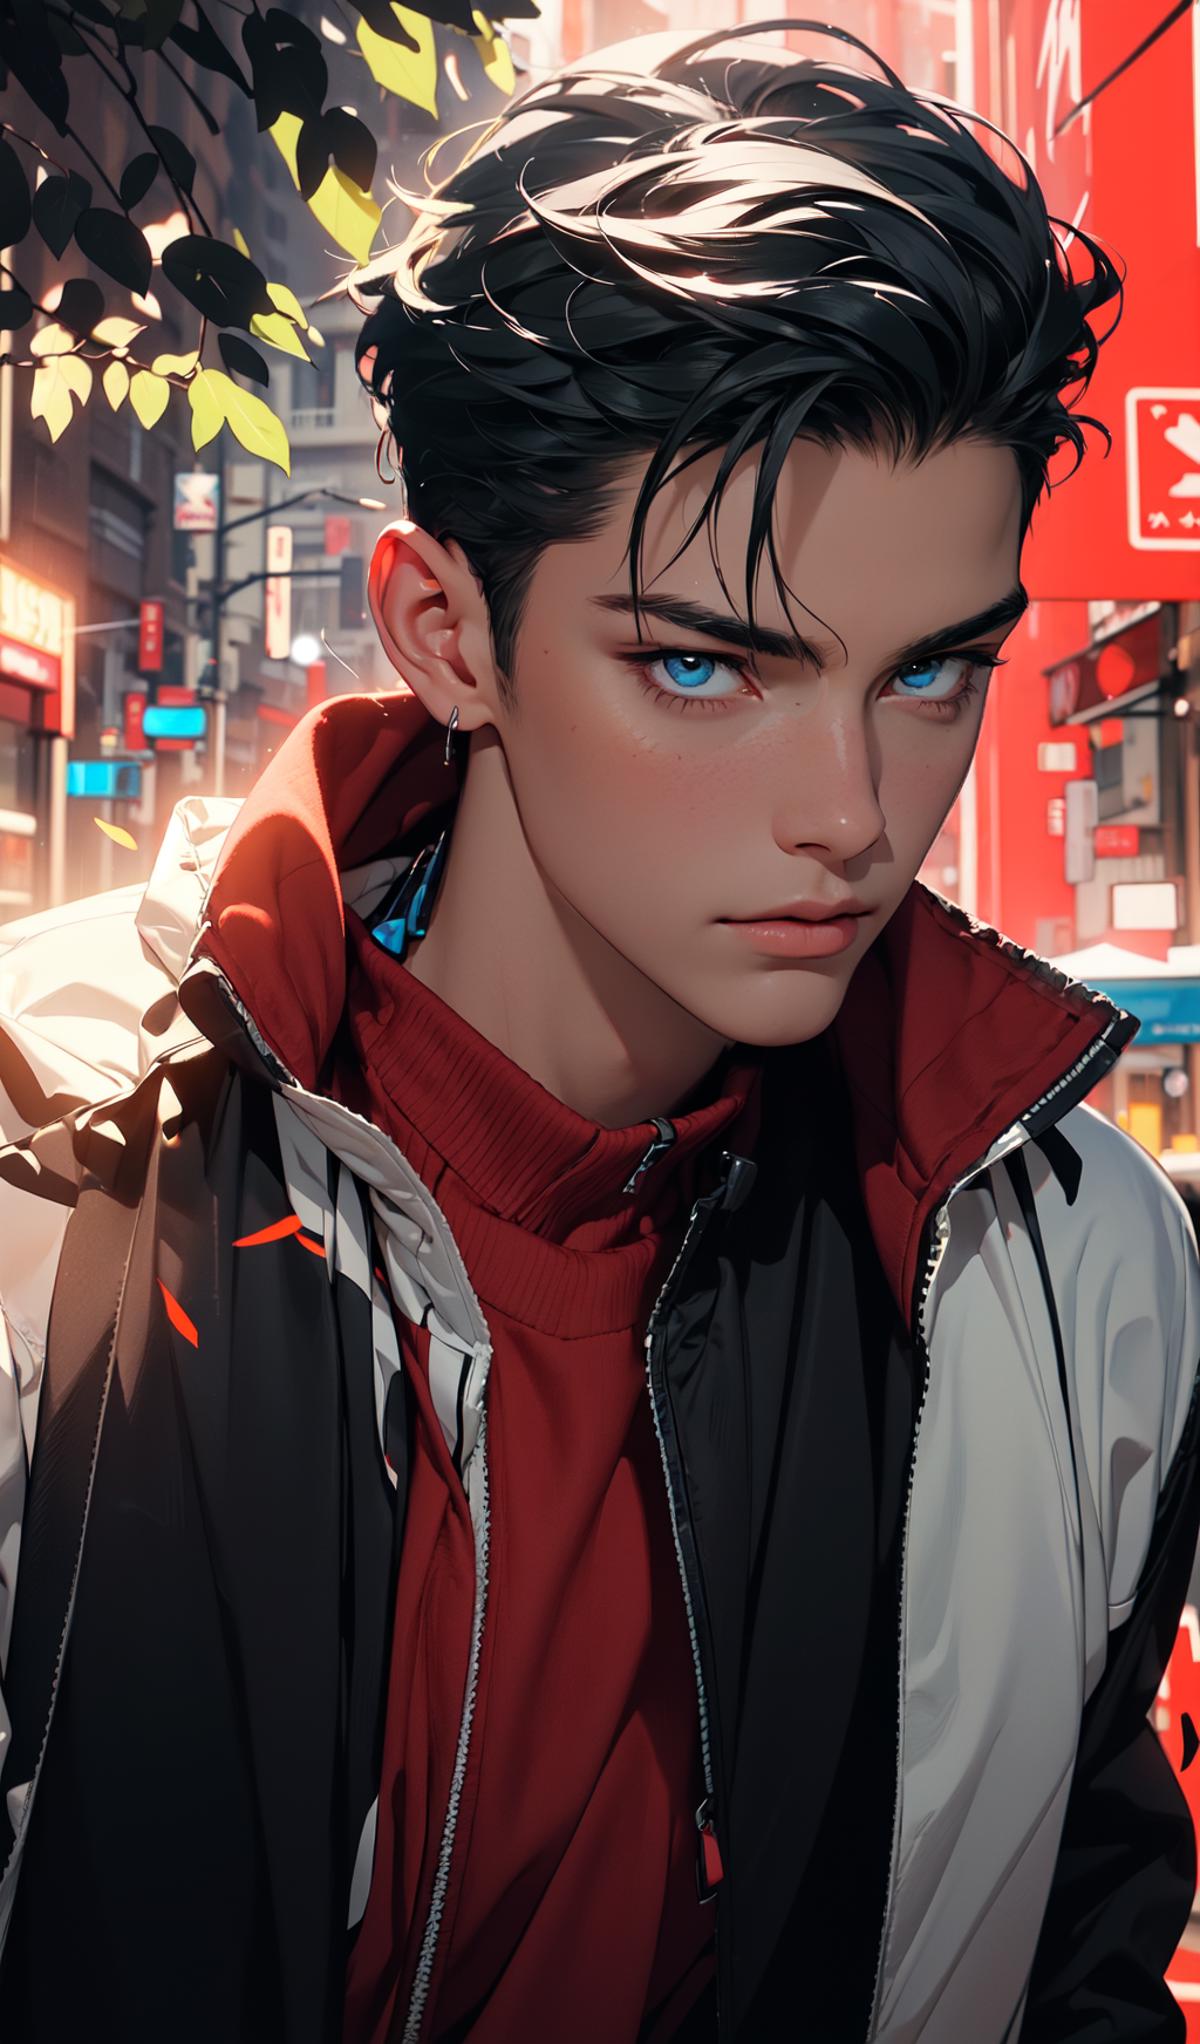 Anime-style illustration of a young man in a red shirt and white and black jacket.